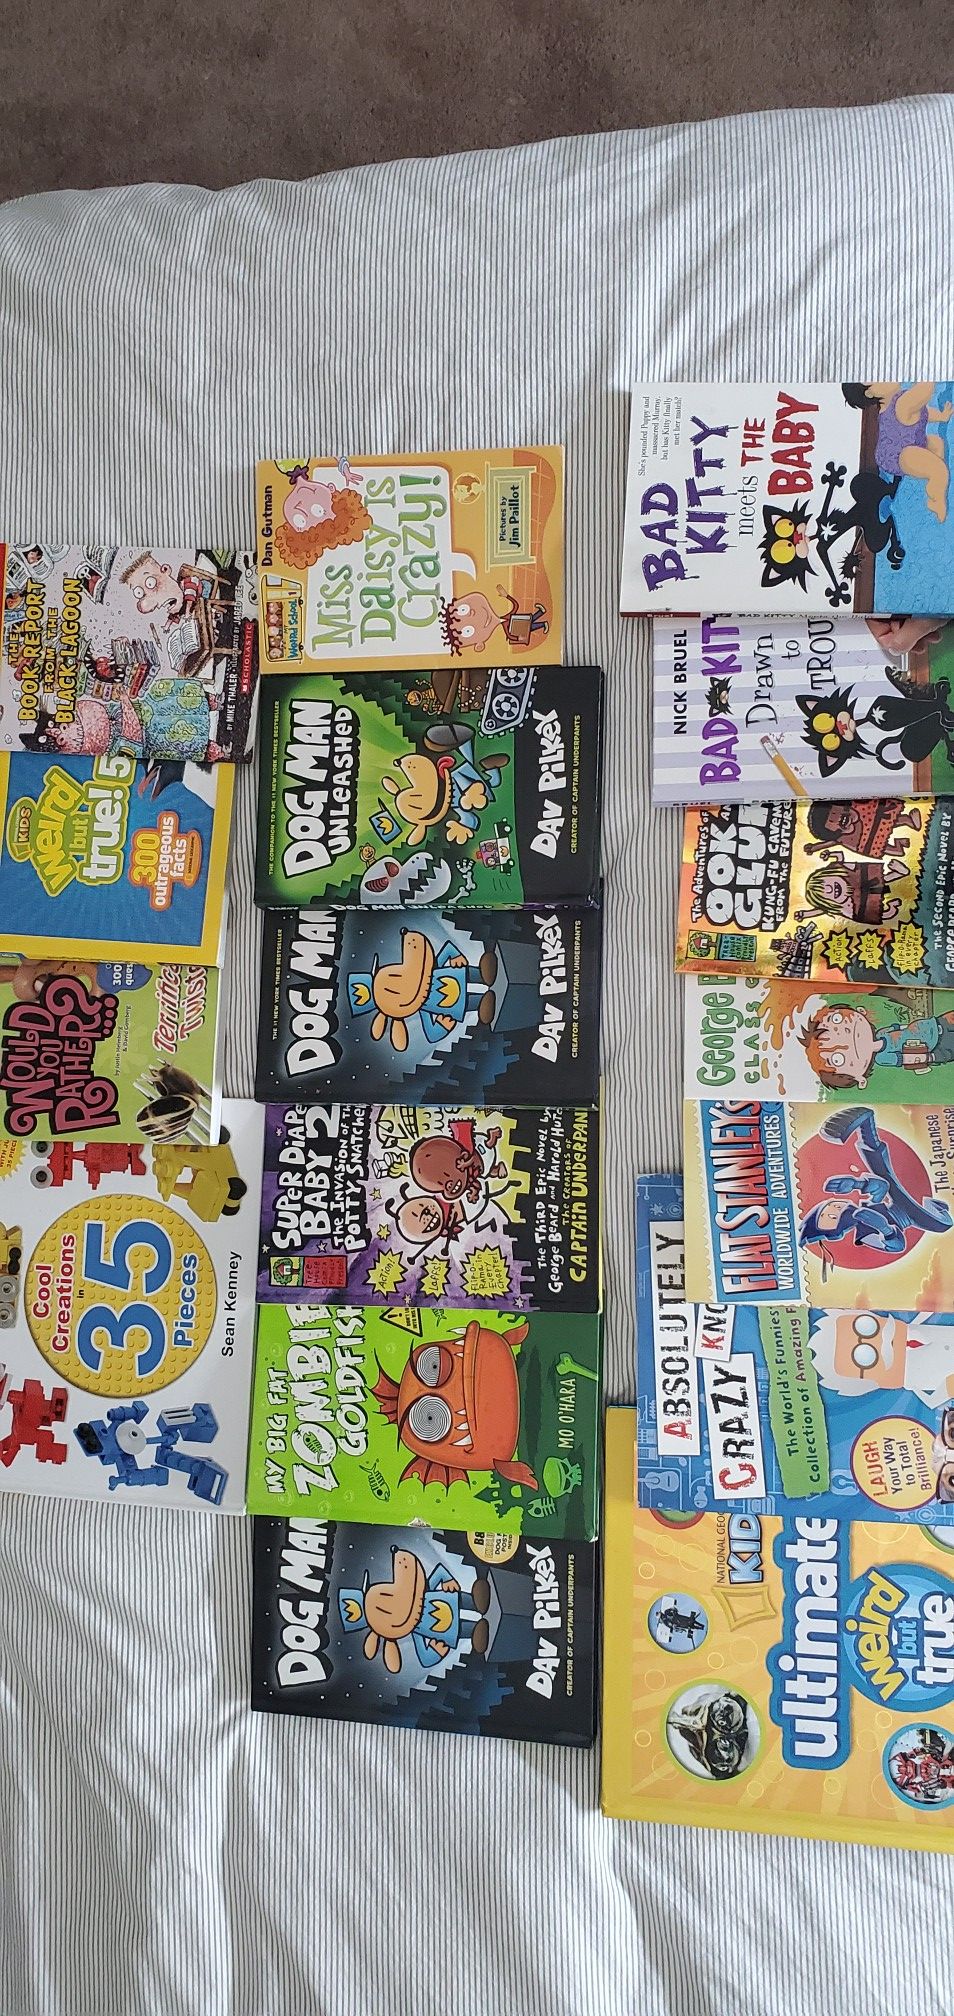 Huge lot of brand new kids books. Smoke free home and in perfect shape.